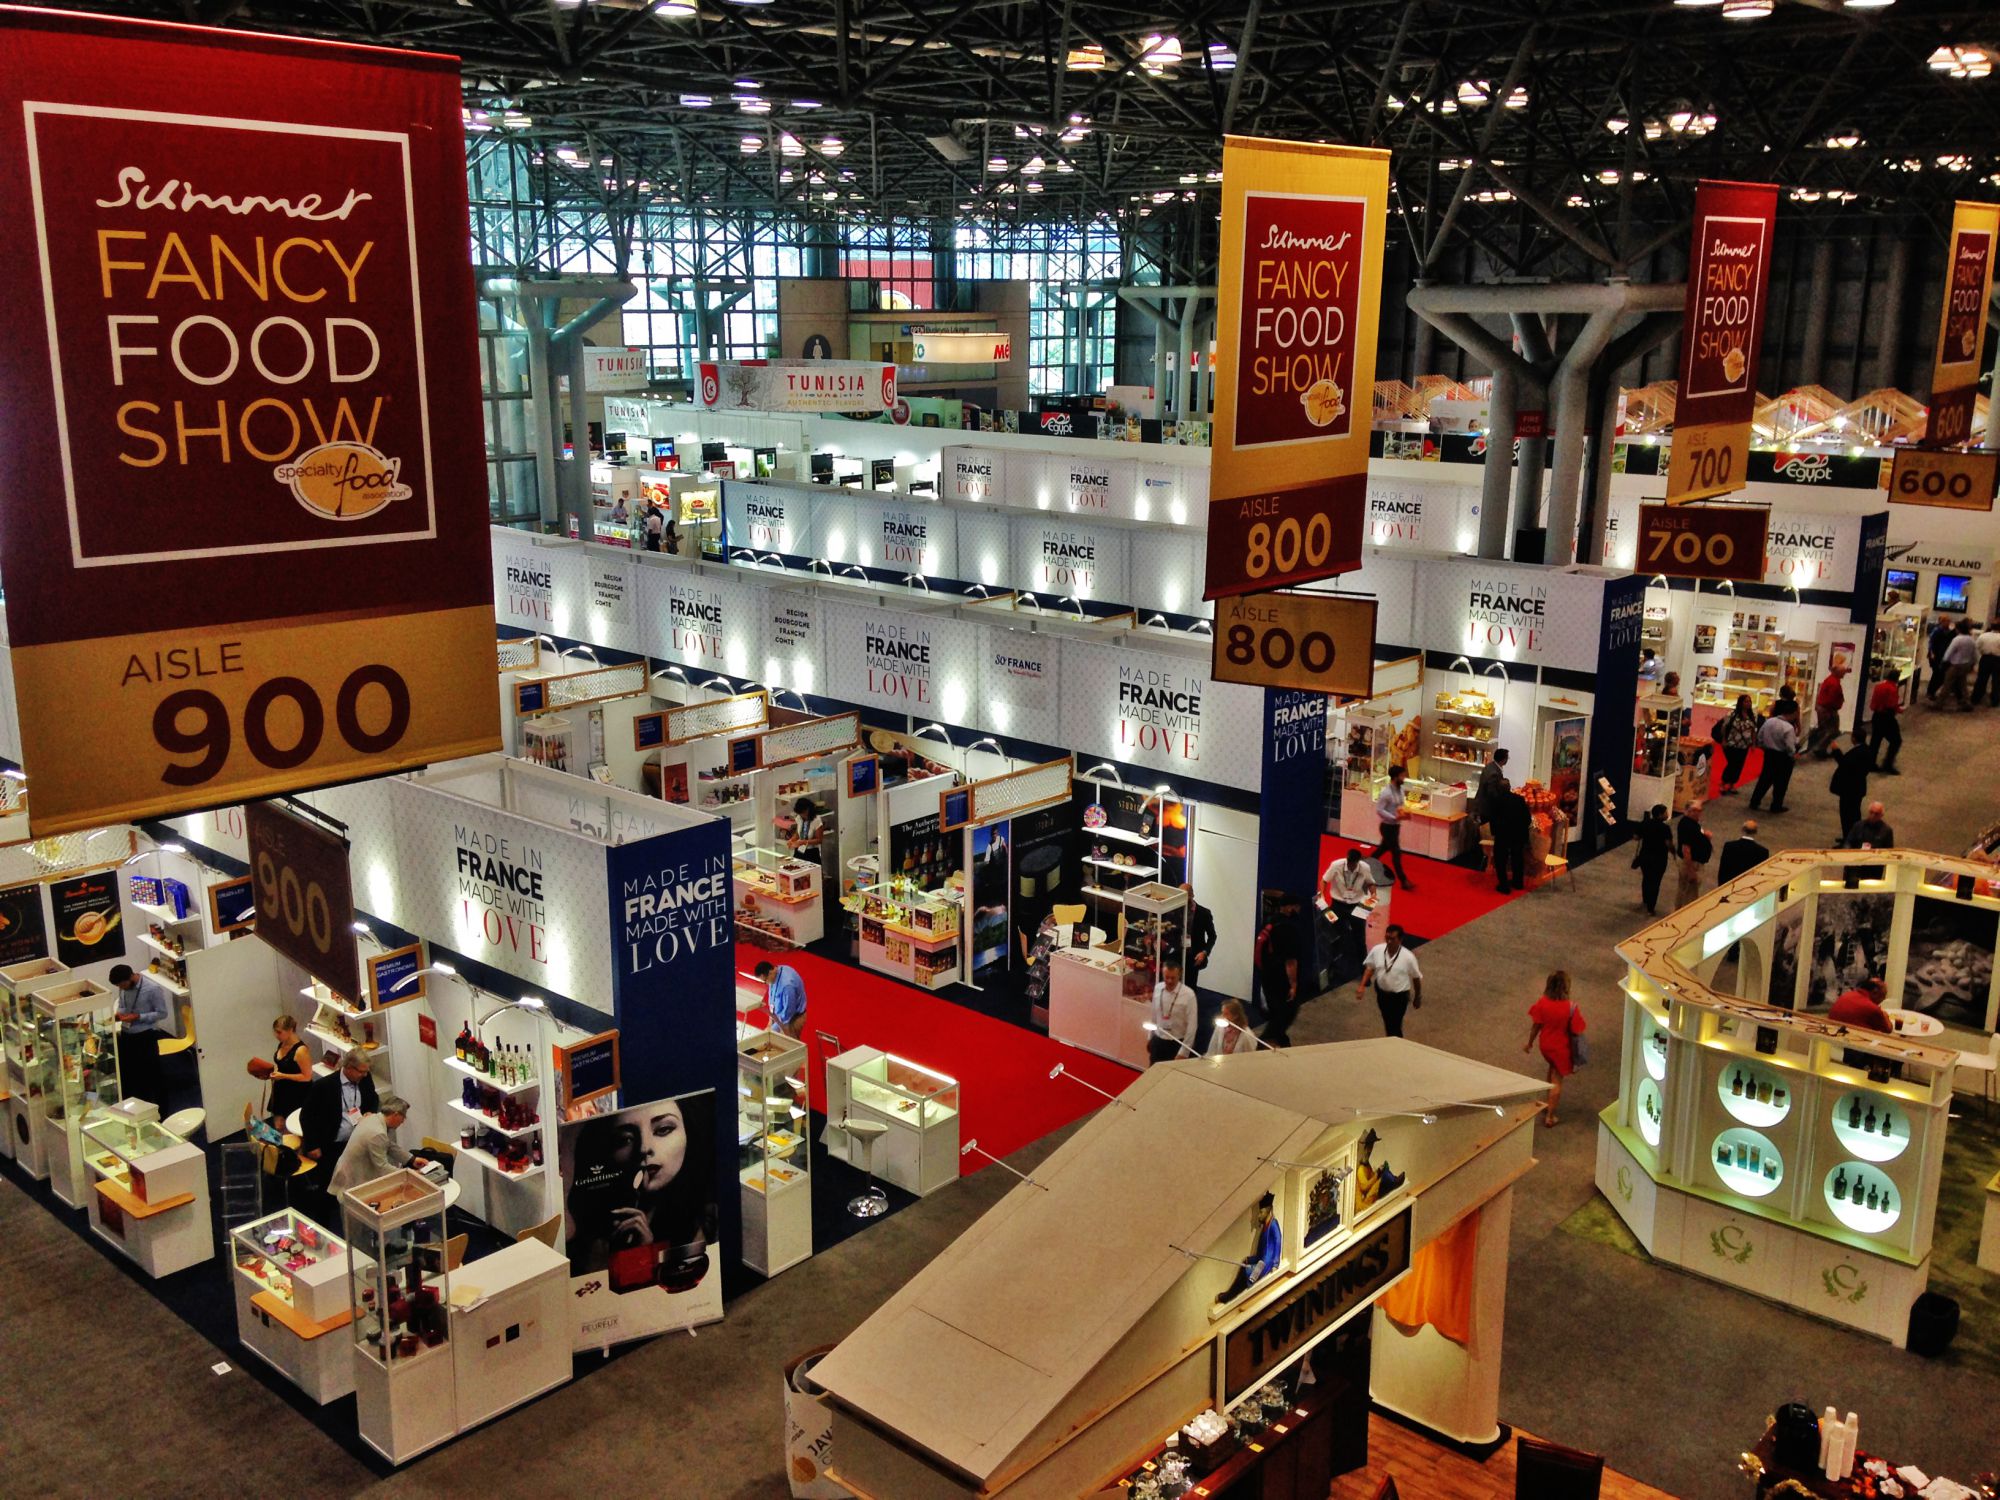 The Best Things We Saw At The Summer Fancy Food Show Dieline Design